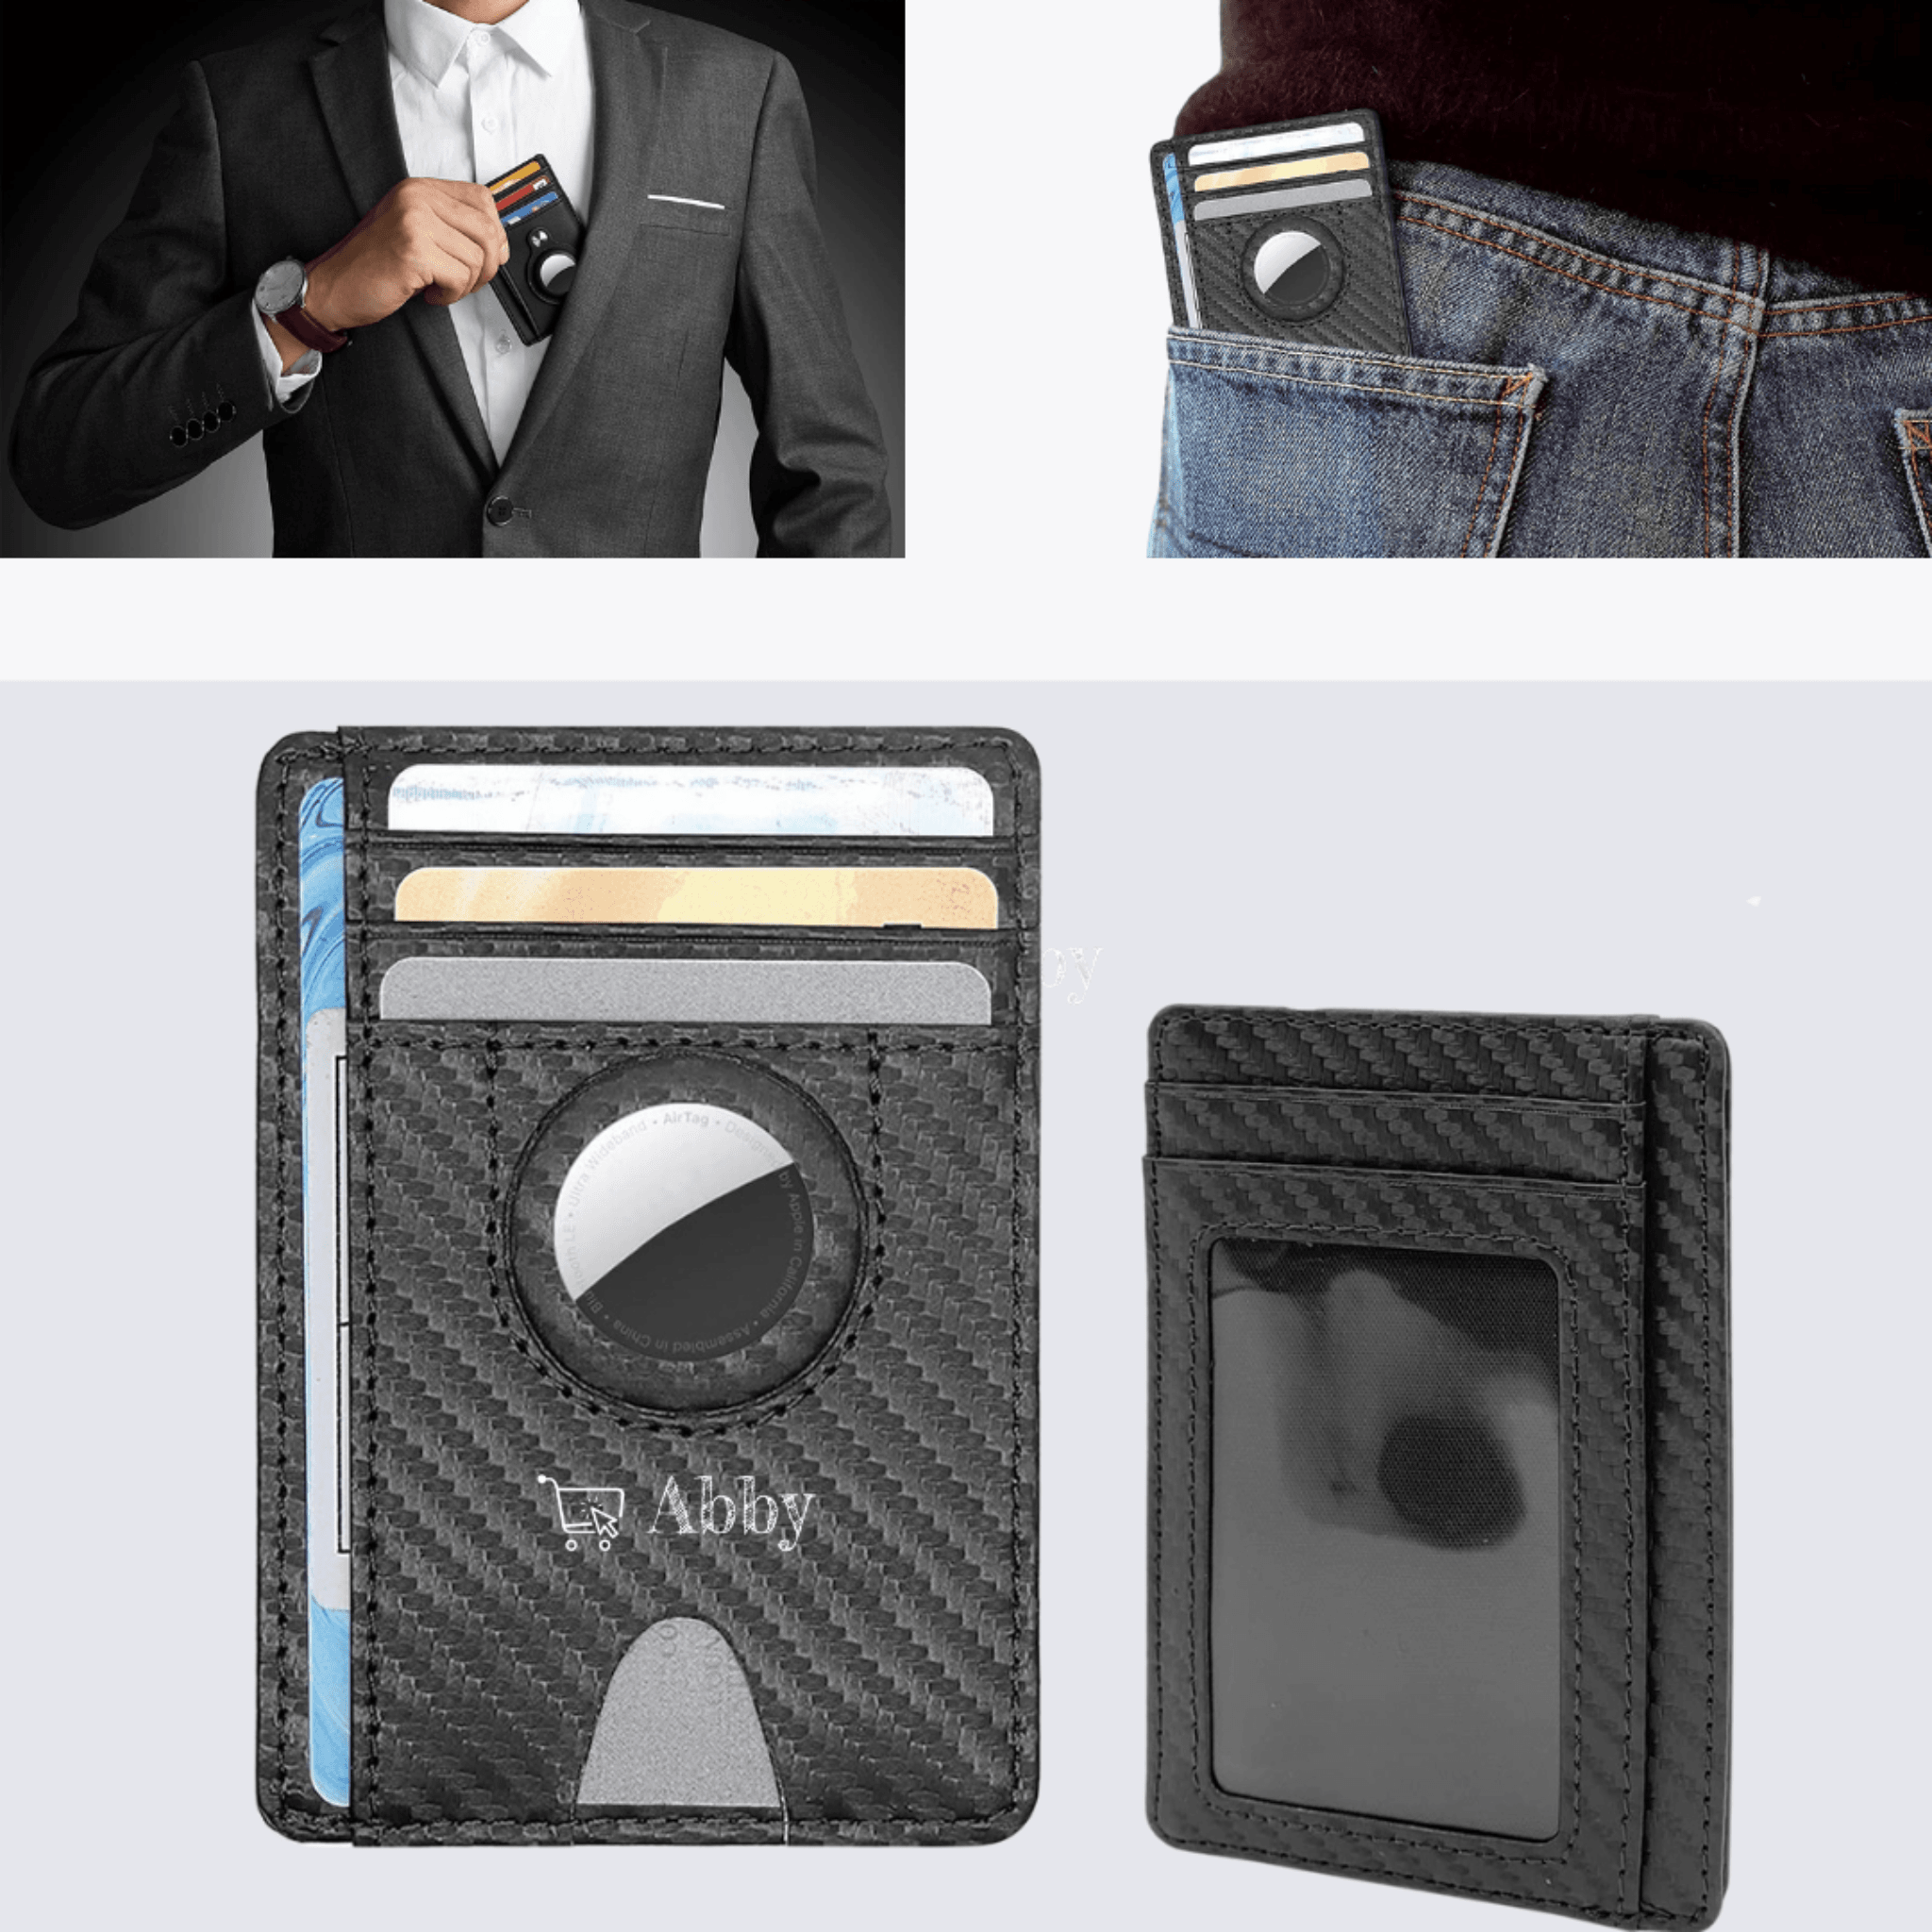 Abby's™ Anti-Lost Slim Wallet, Cards holder with Apple AirTag Case - Front Pocket - Abbycart